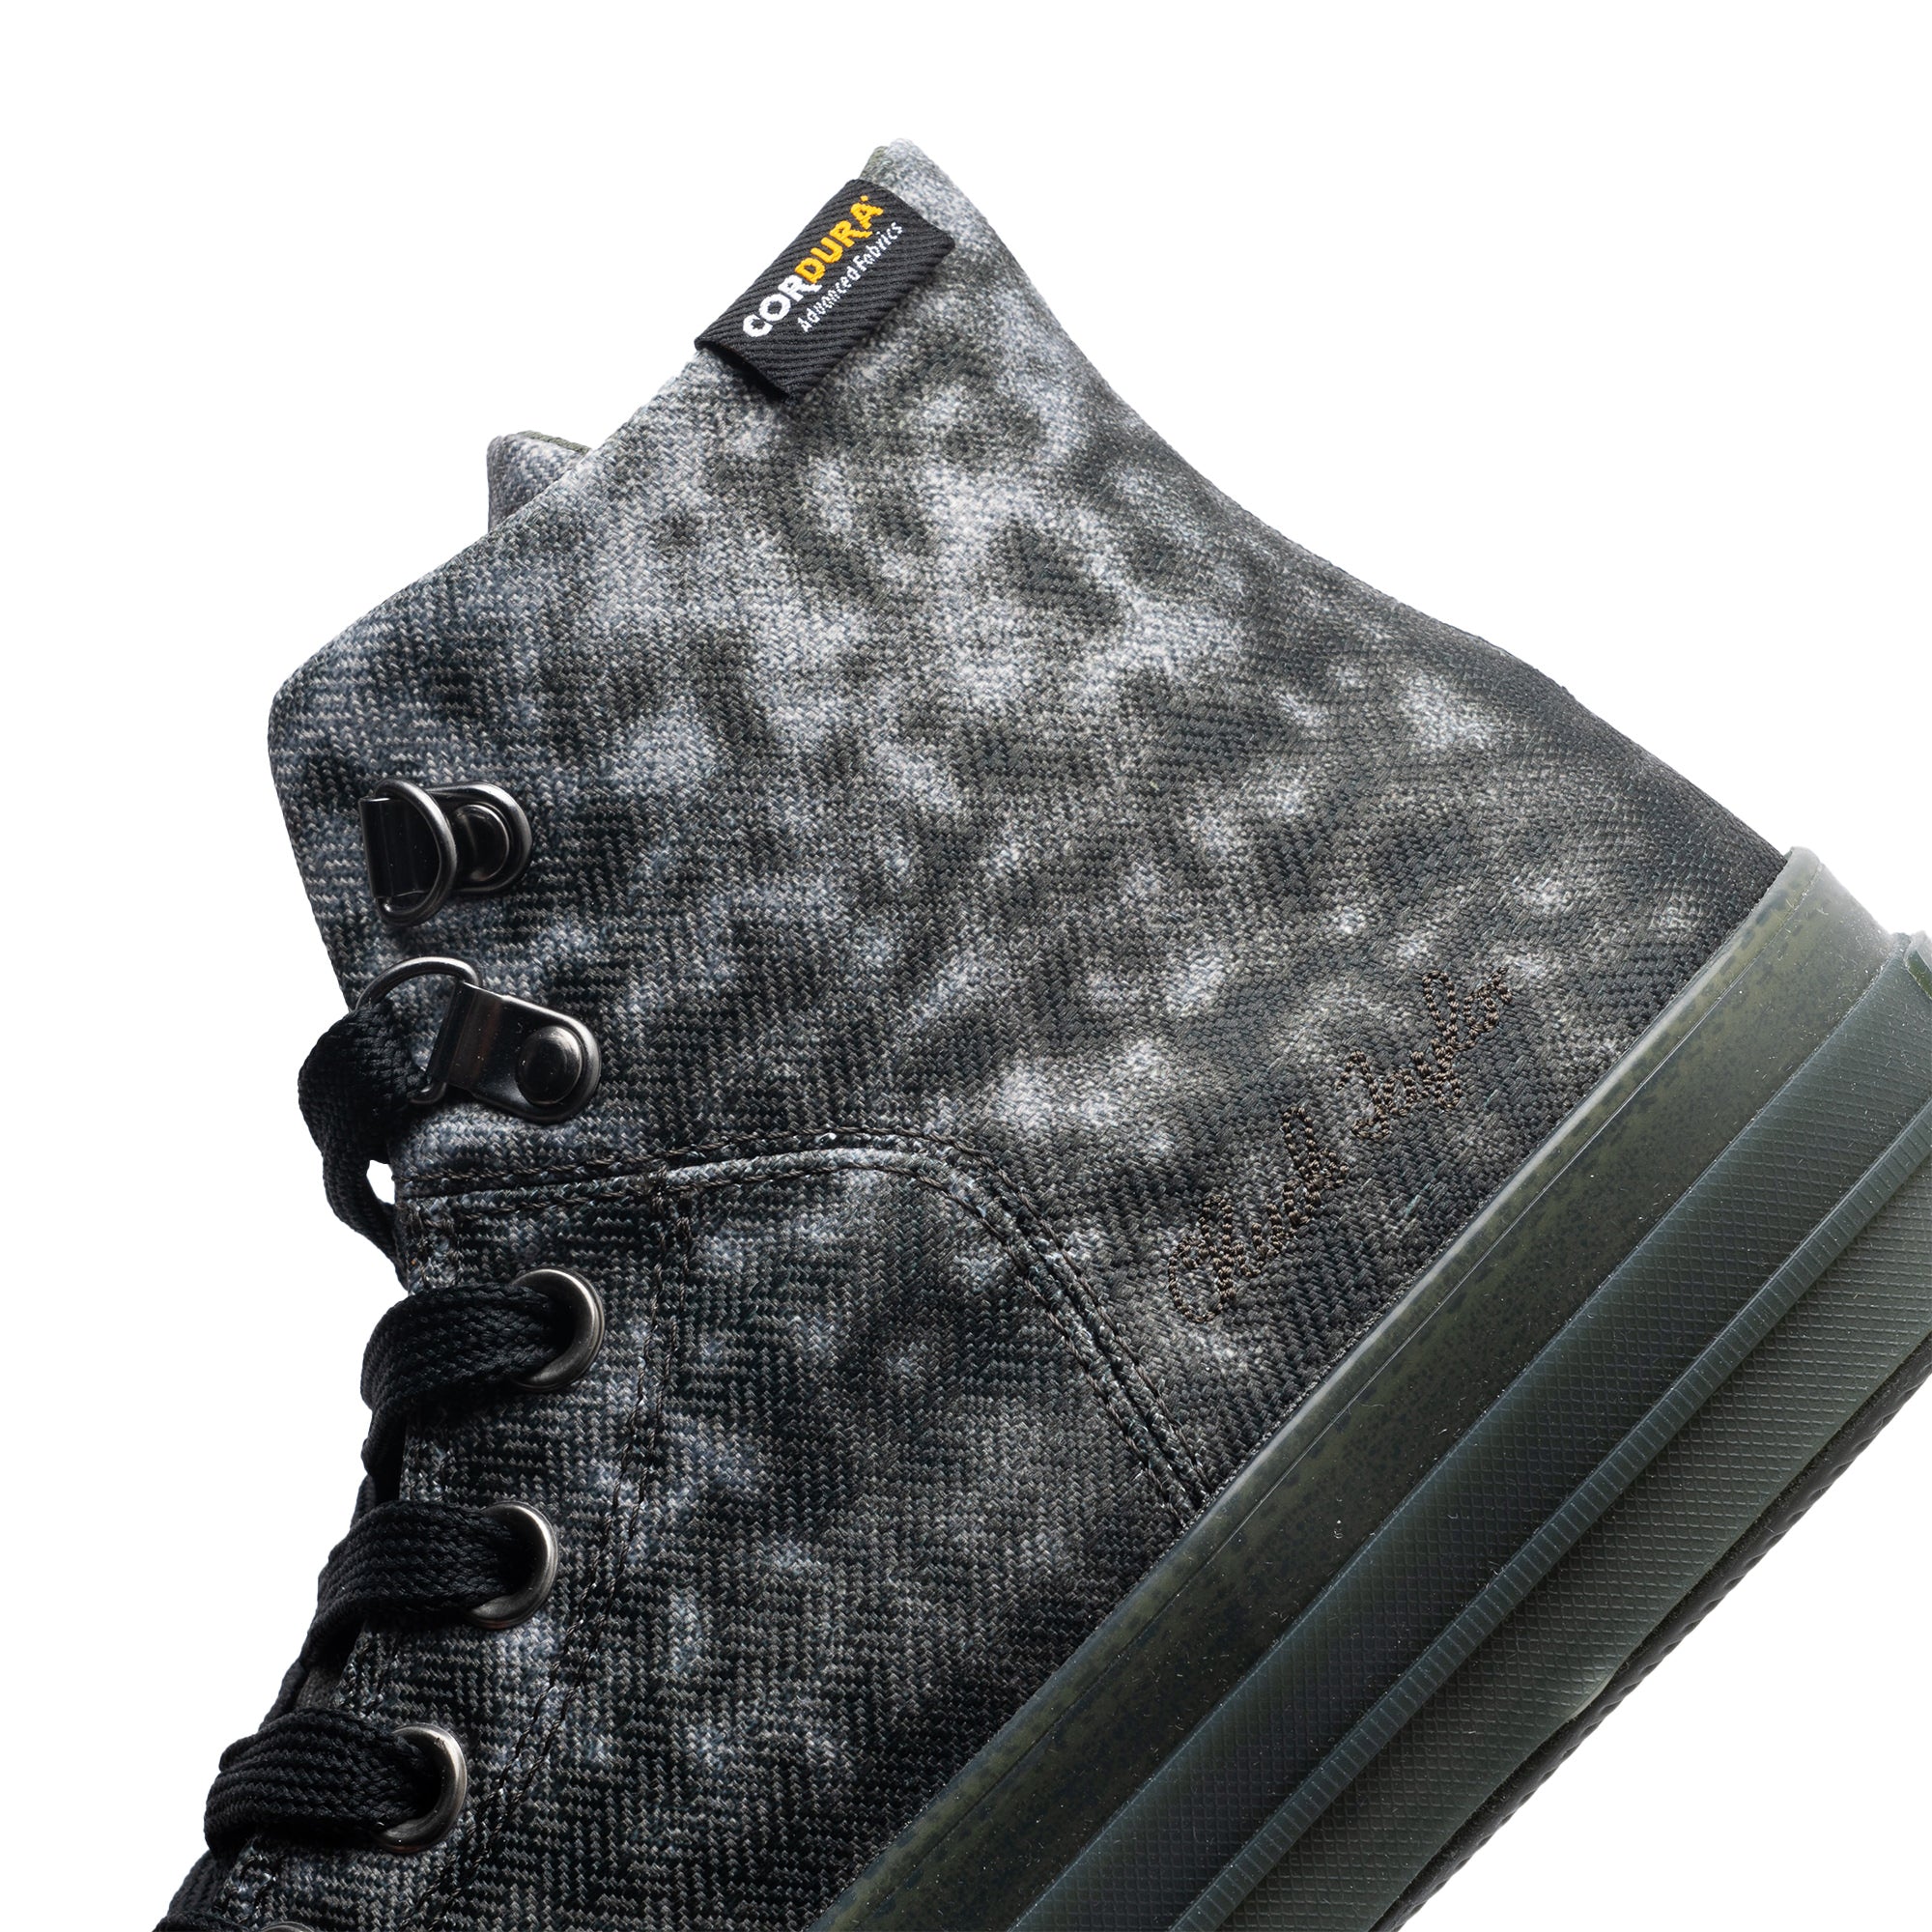 The Kendrick Lamar Co-Founded pgLang Agency Reworks Two Classic Converse Silhouettes